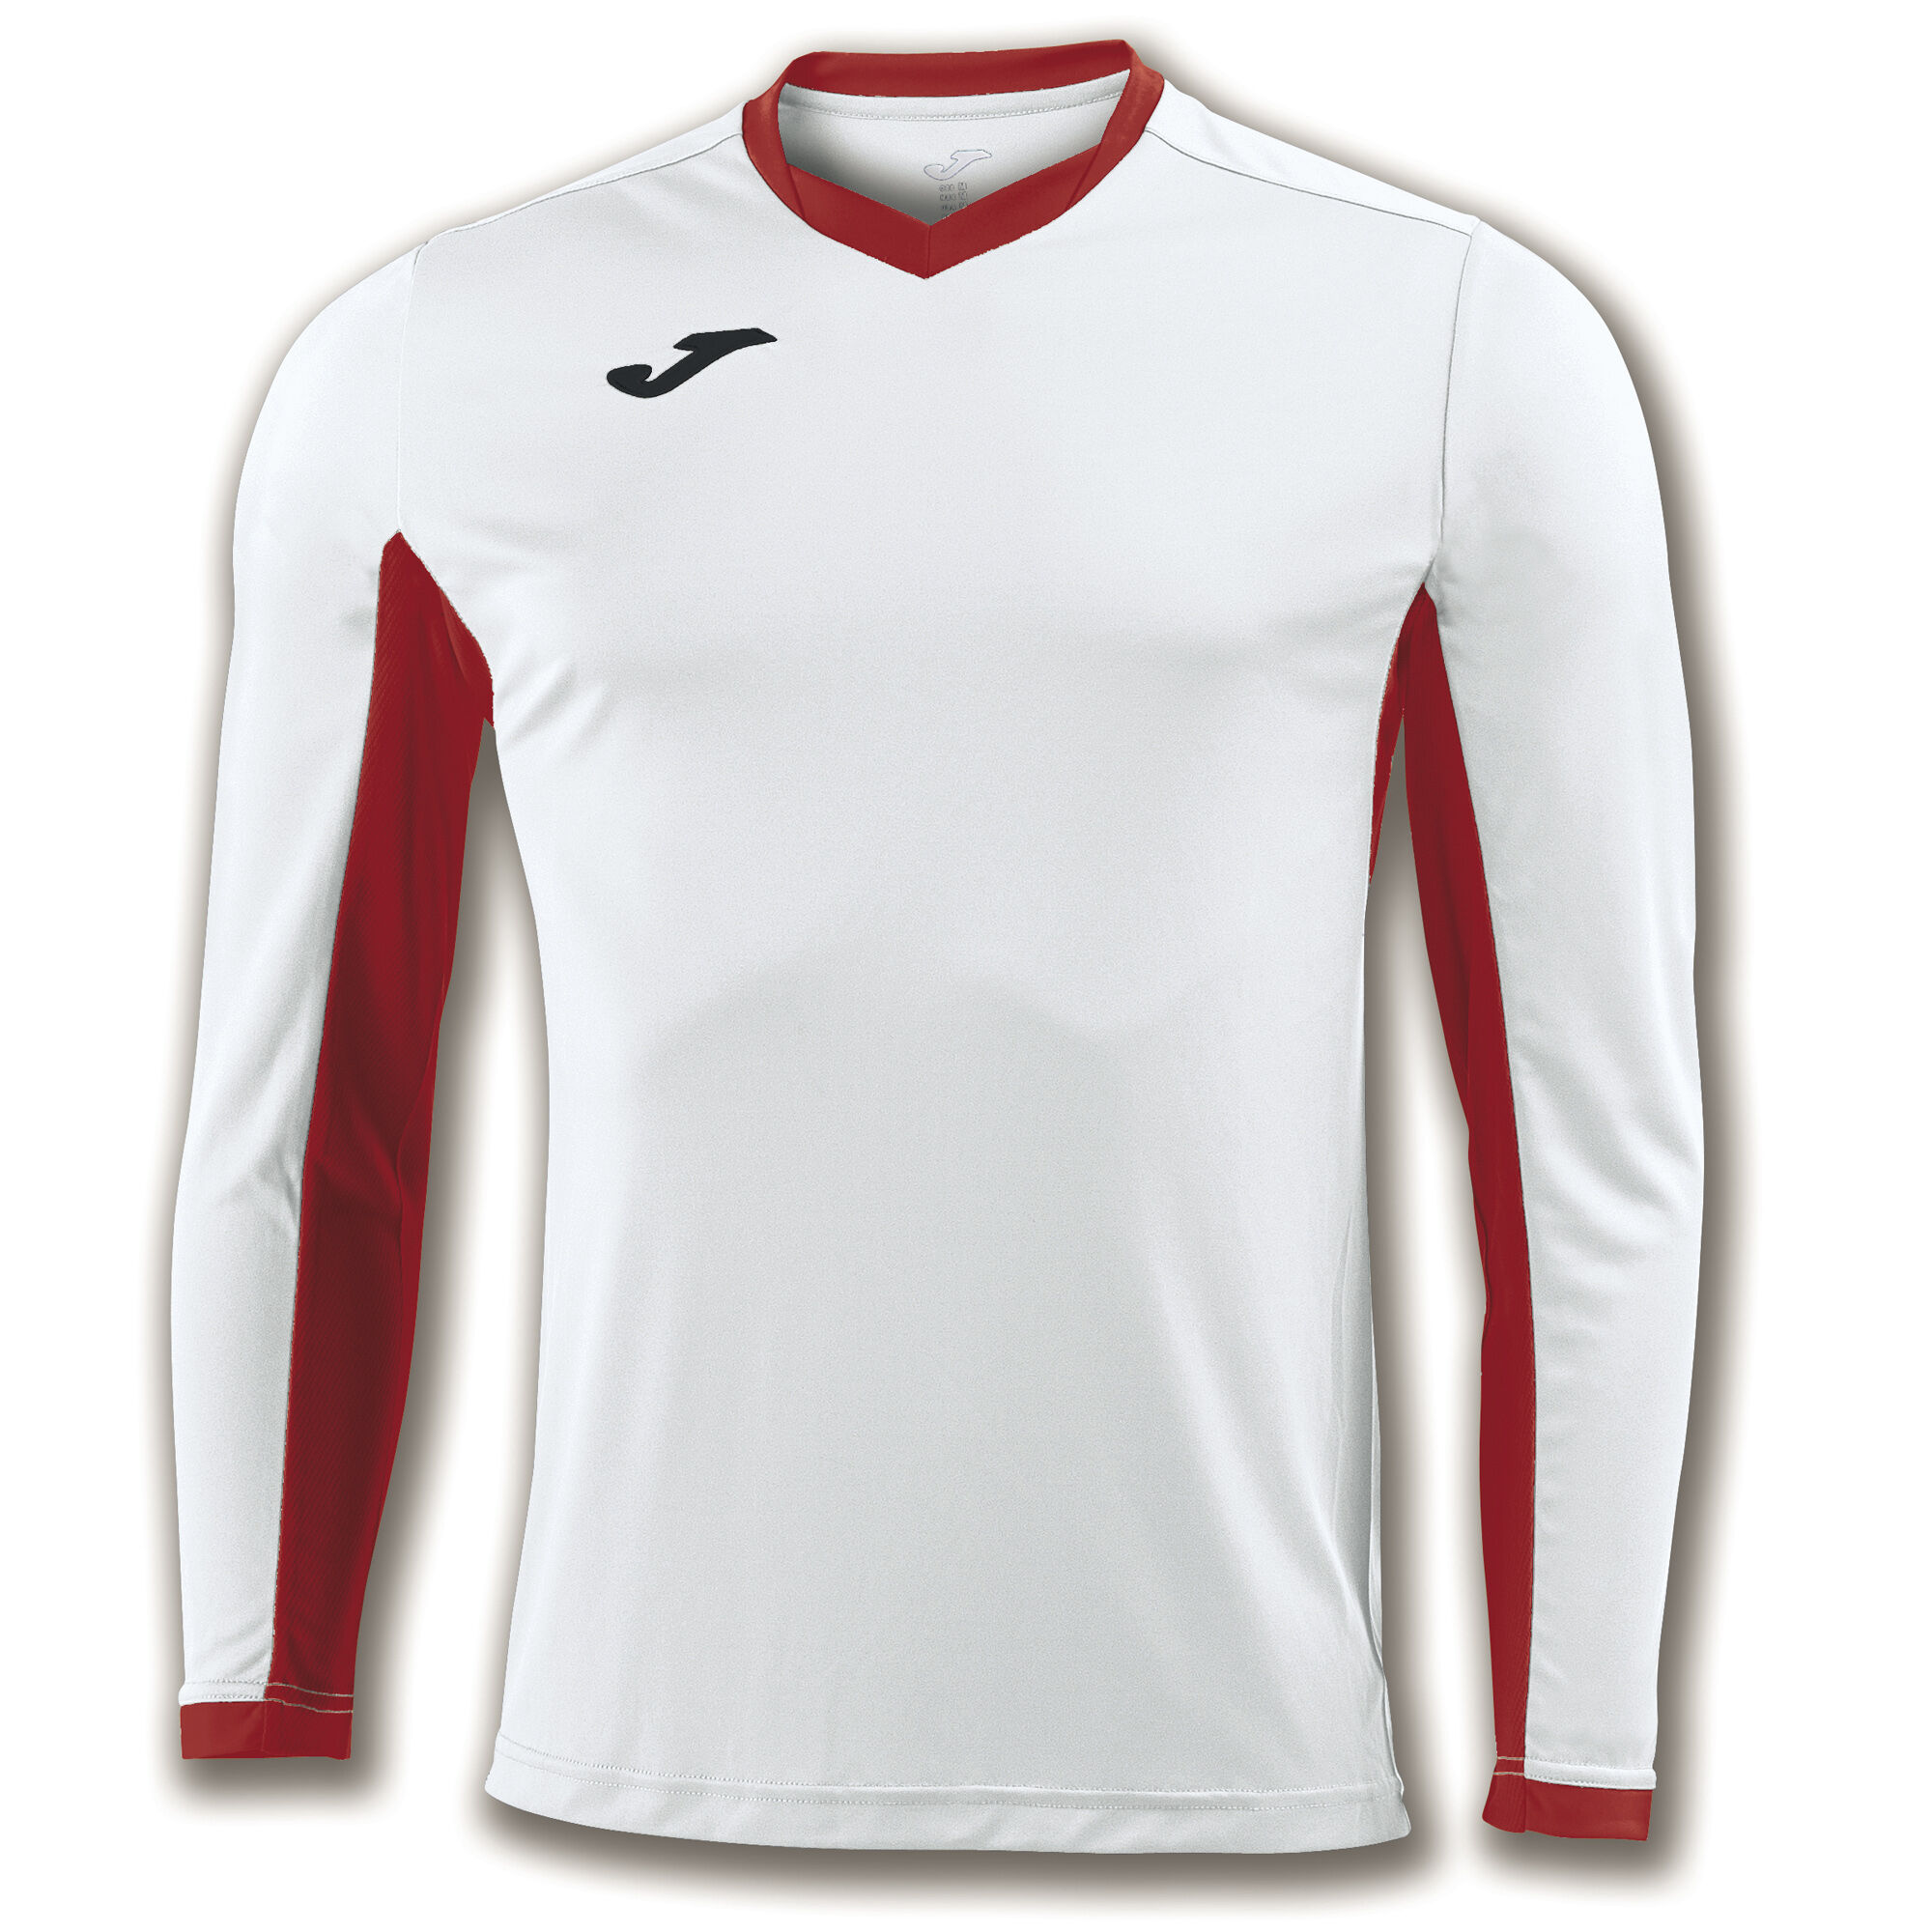 MAILLOT MANCHES LONGUES HOMME CHAMPIONSHIP IV BLANC ROUGE